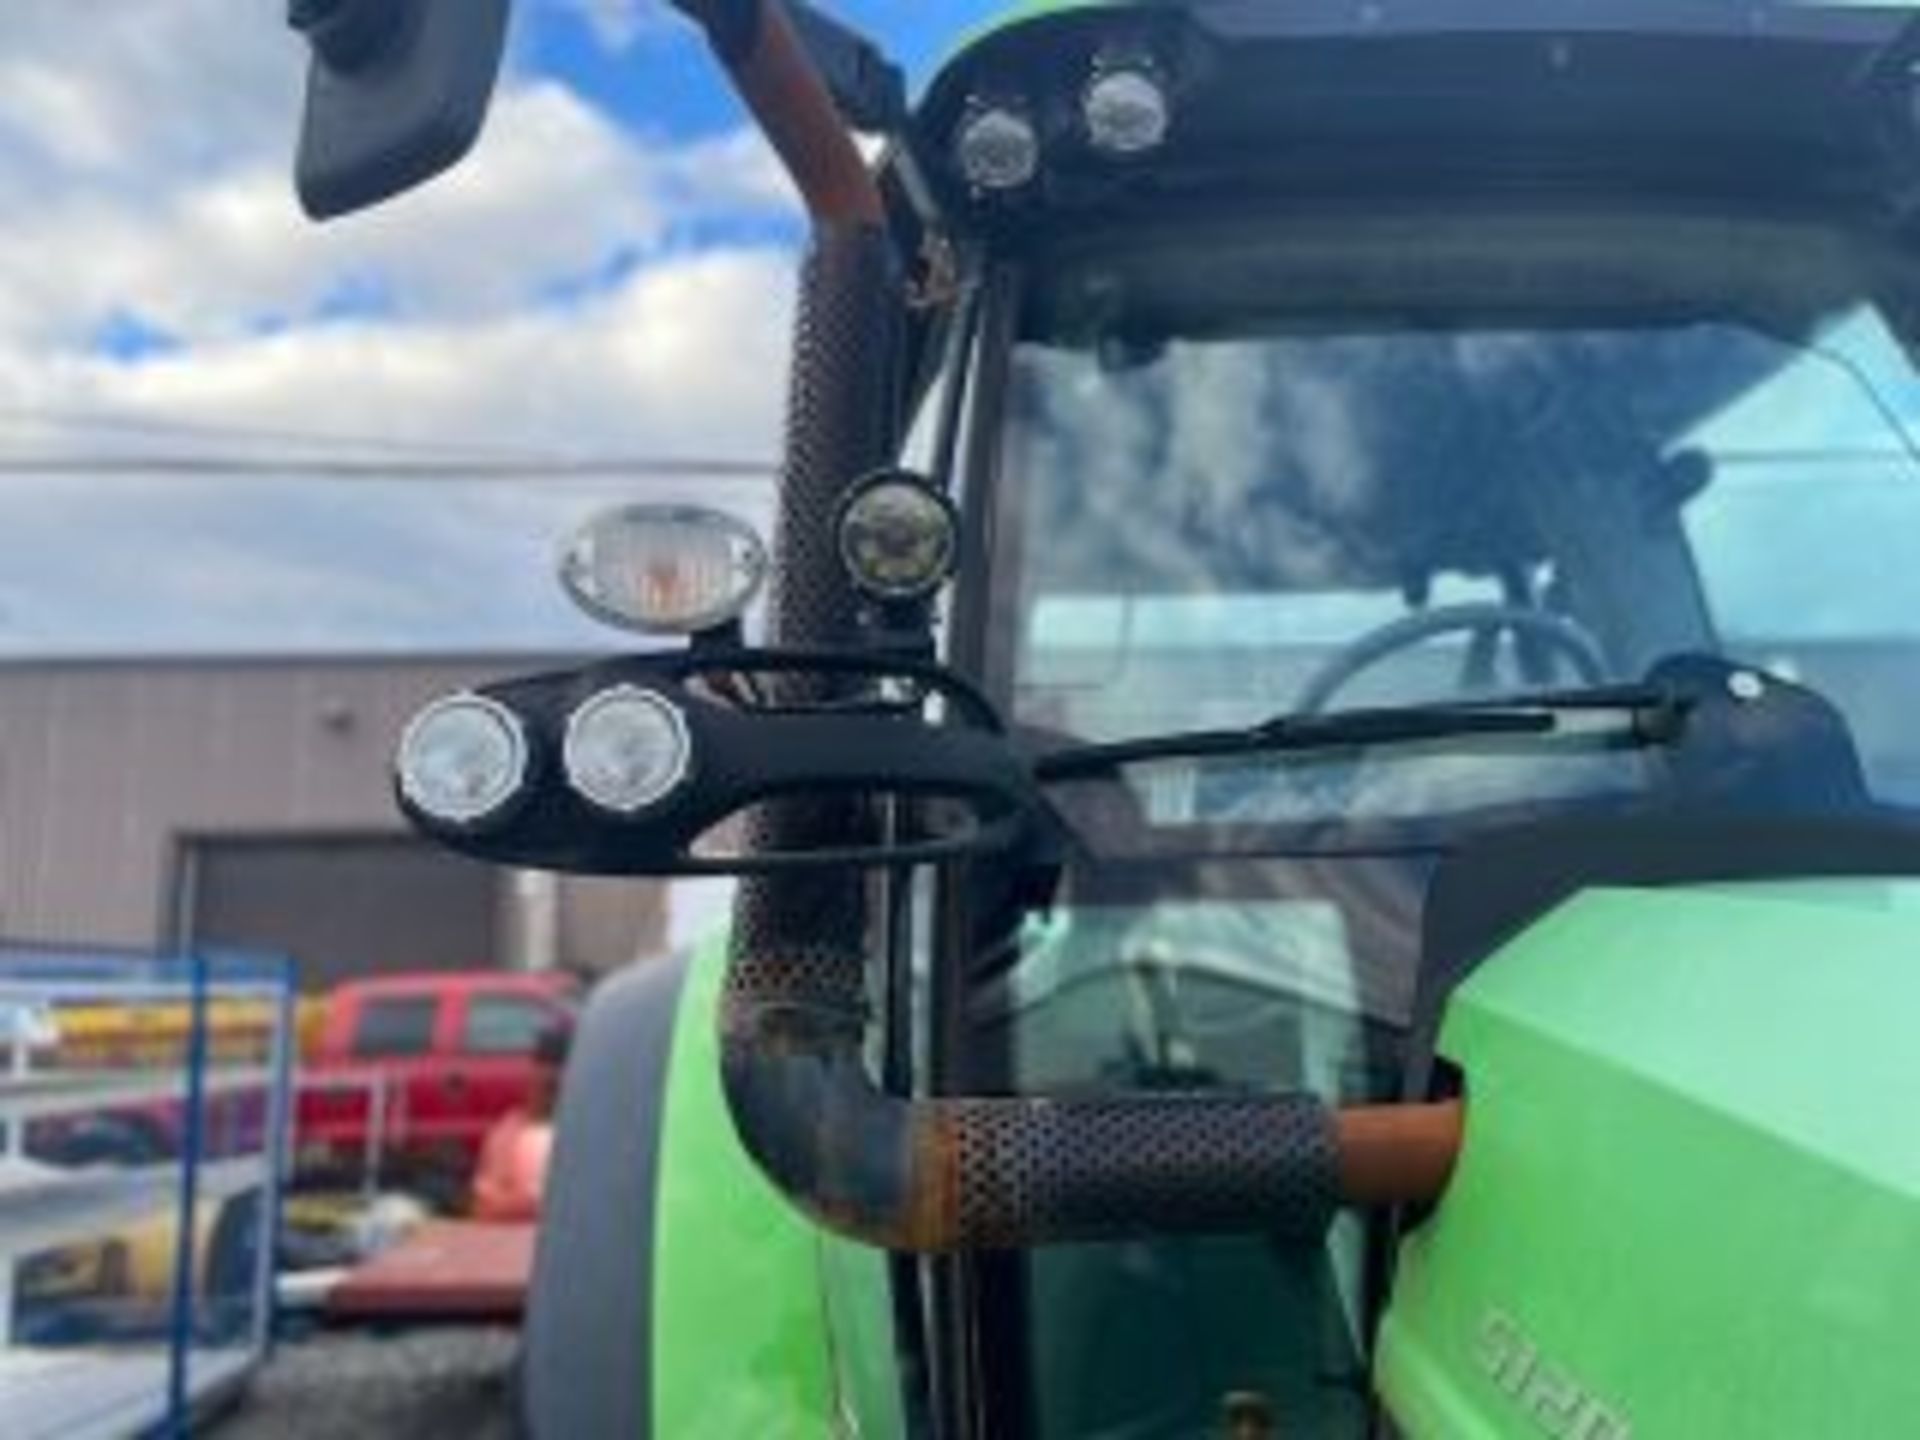 2018 DEUTZ-FAHR agricultural tractor # T51-10003 With PRONOVOST snow removal attachment 1109.8 Hours - Image 4 of 27